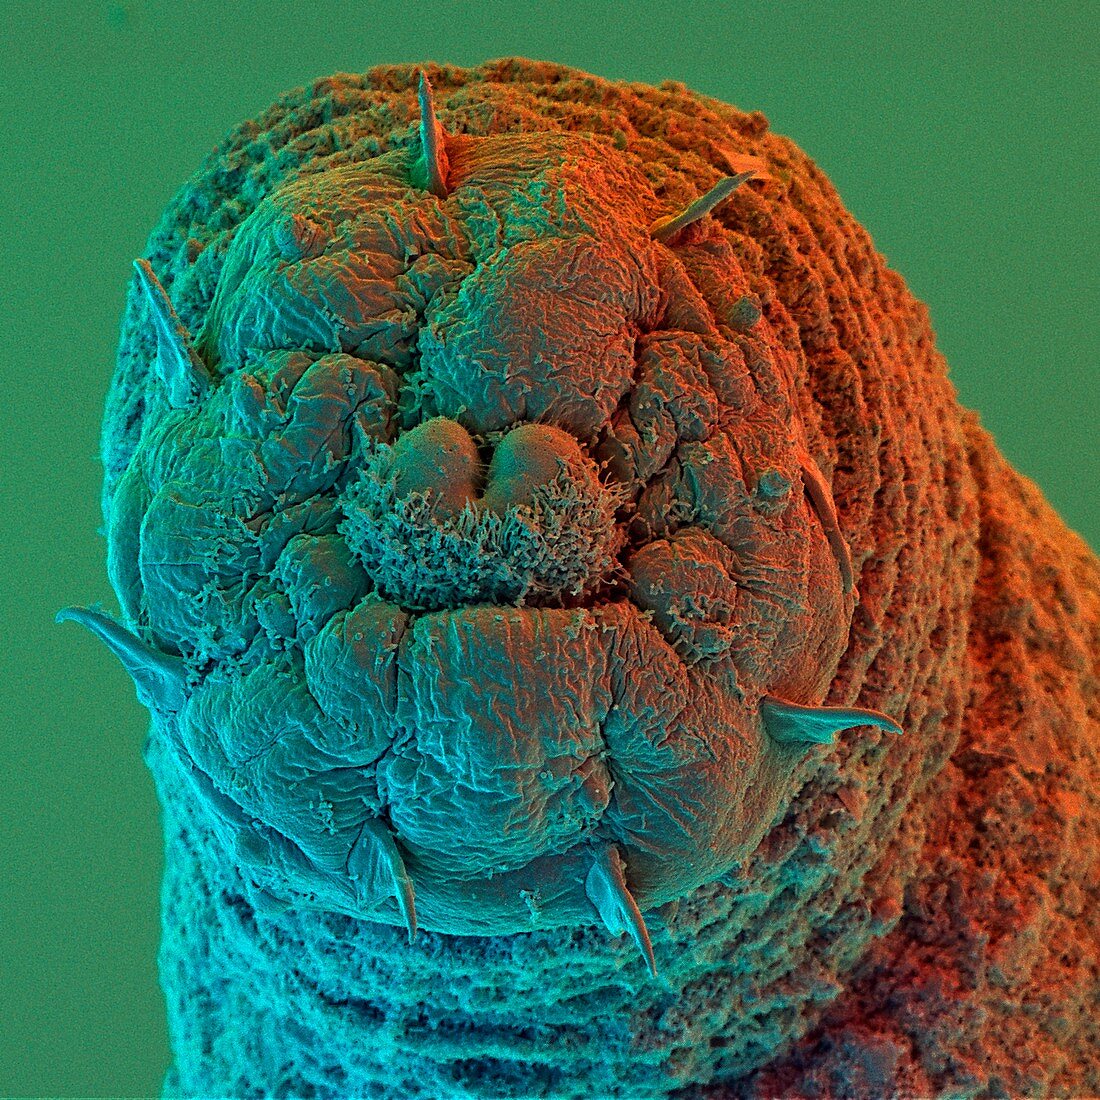 Colour SEM of mouth of a Sipunculid peanut worm